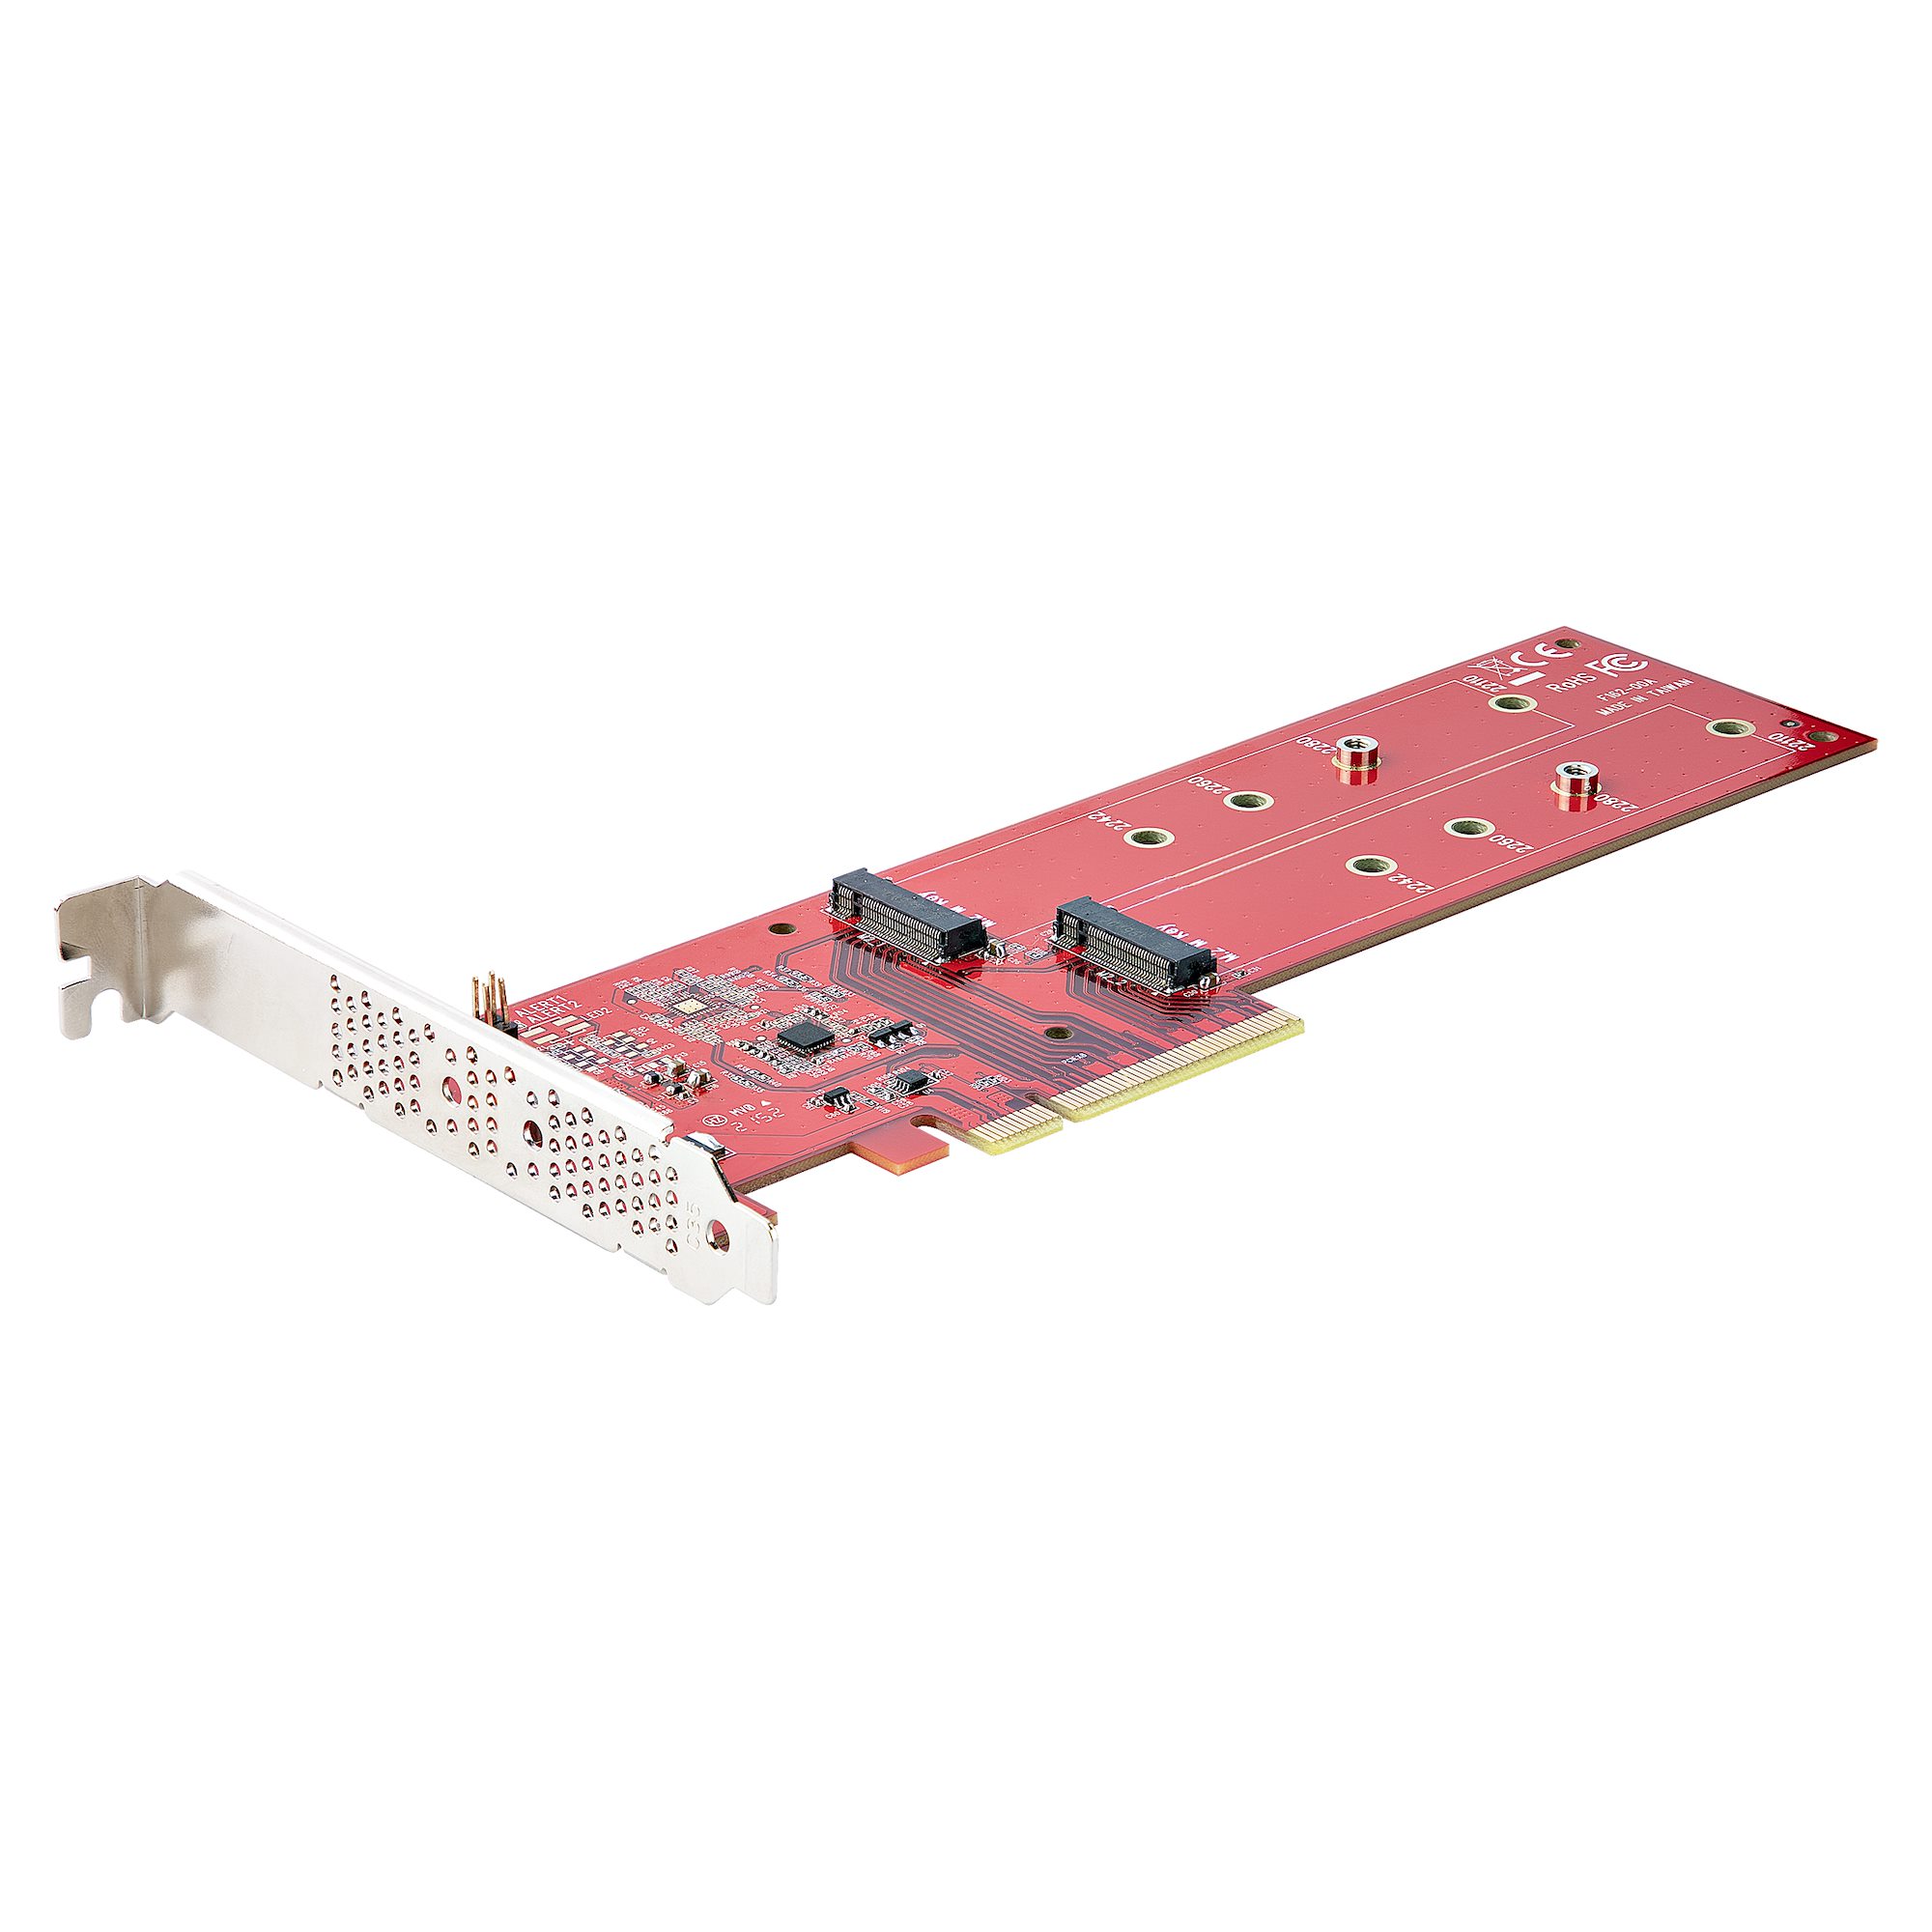 NVMe AHCI PCIe x4 M.2 NGFF SSD to PCIE 3.0 x4 converter adapter In CA FF 